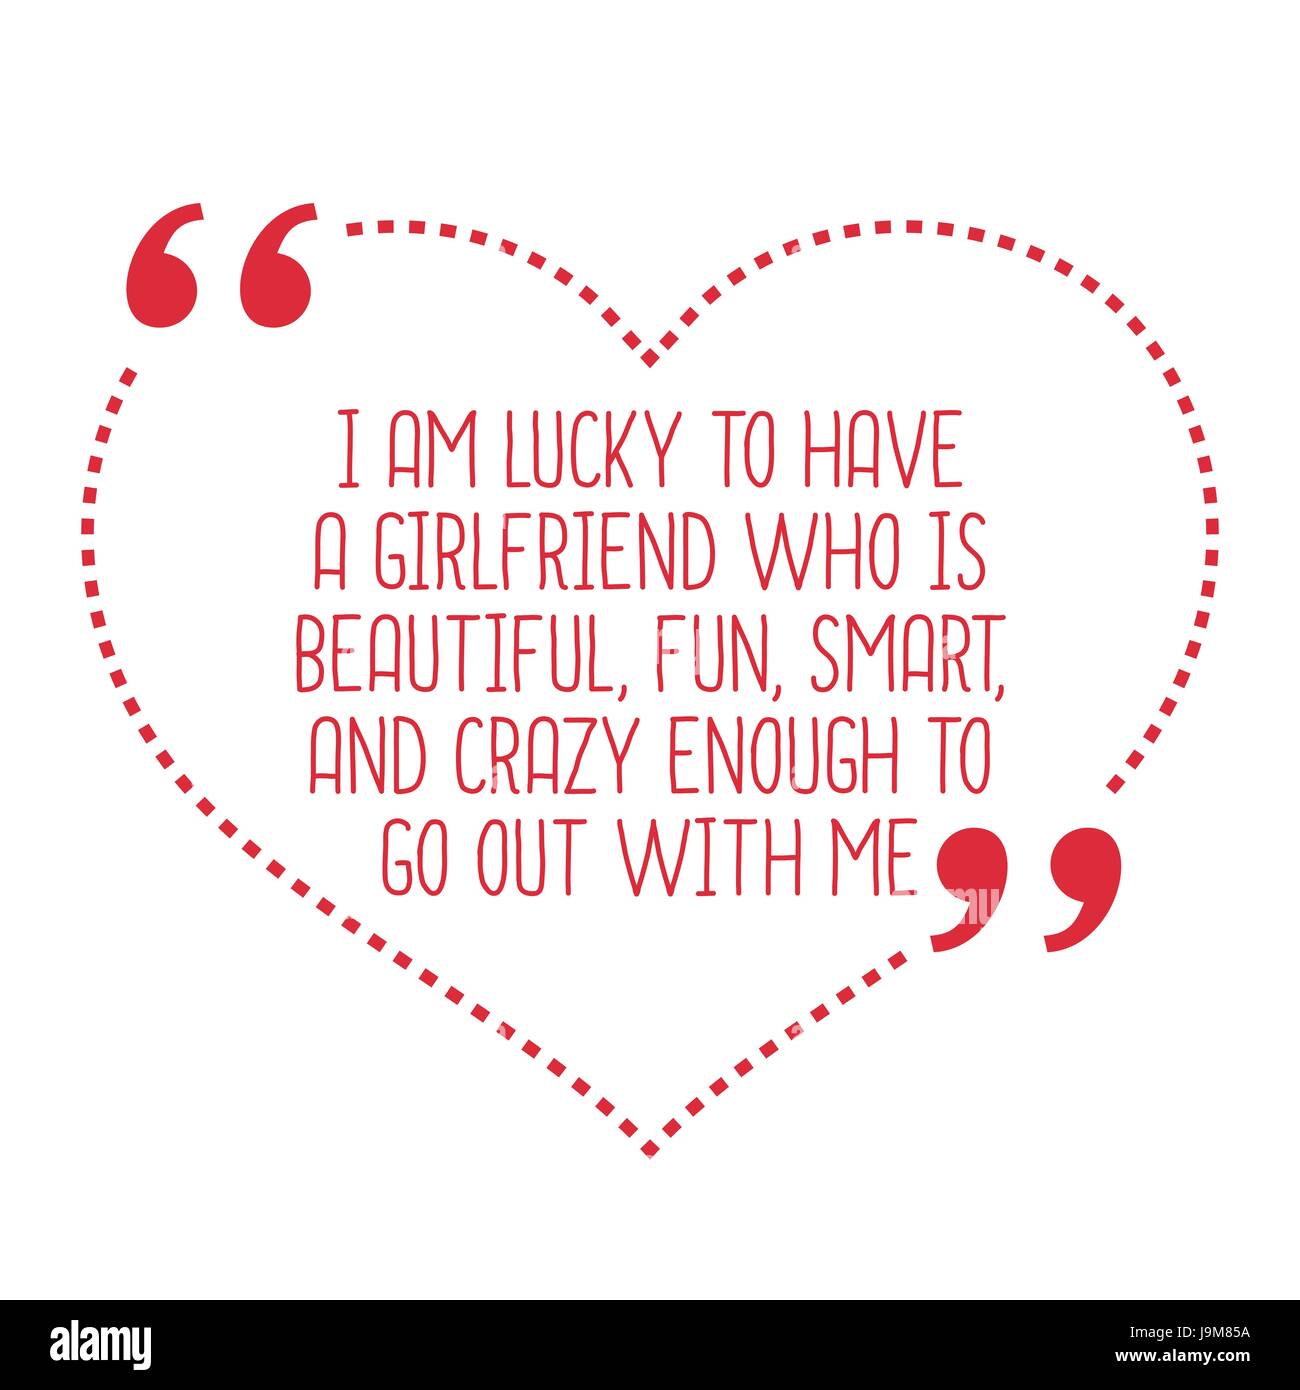 Funny love quote. I am lucky to have a girlfriend who is beautiful, fun, smart, and crazy enough to go out with me. Simple trendy design. Stock Vector